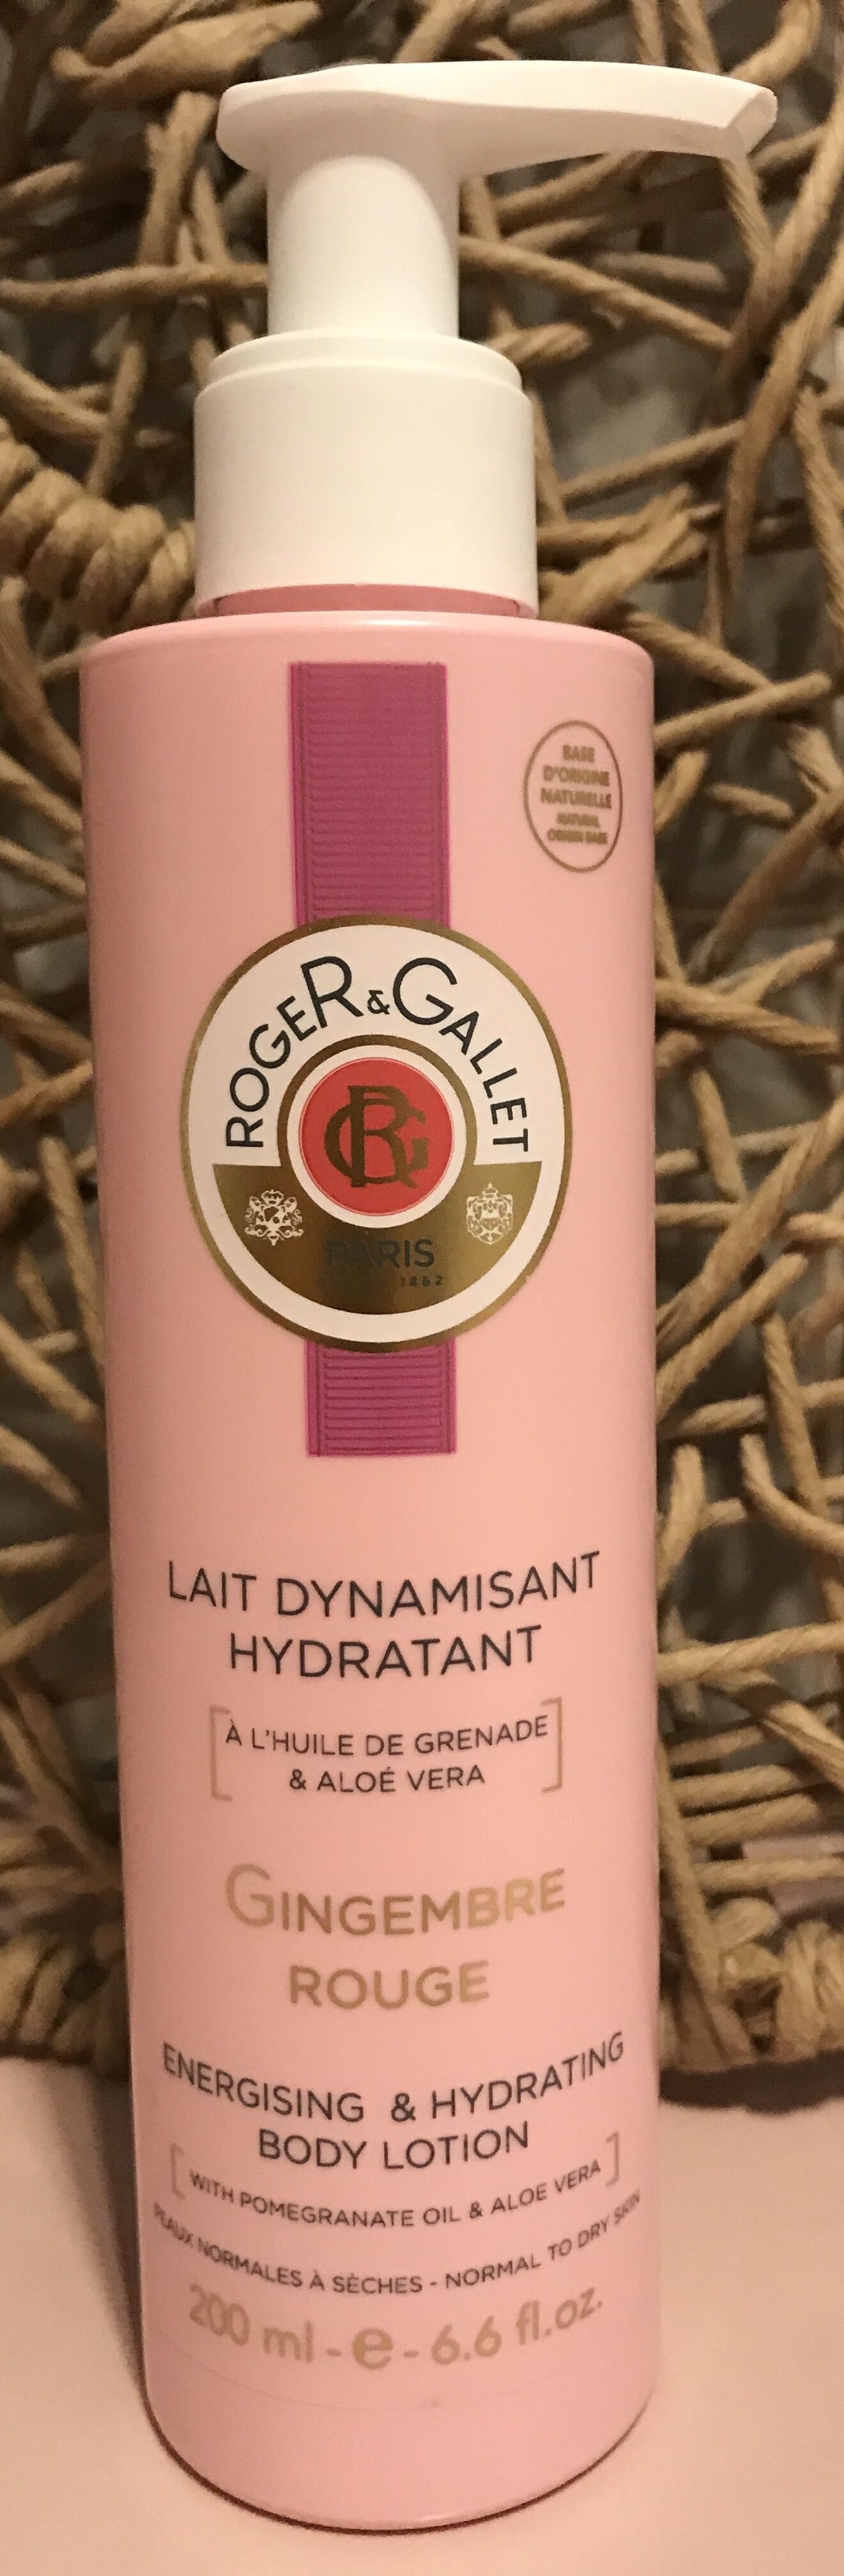 Lait dynamisant hydratant Gingembre Rouge - Tuote - fr